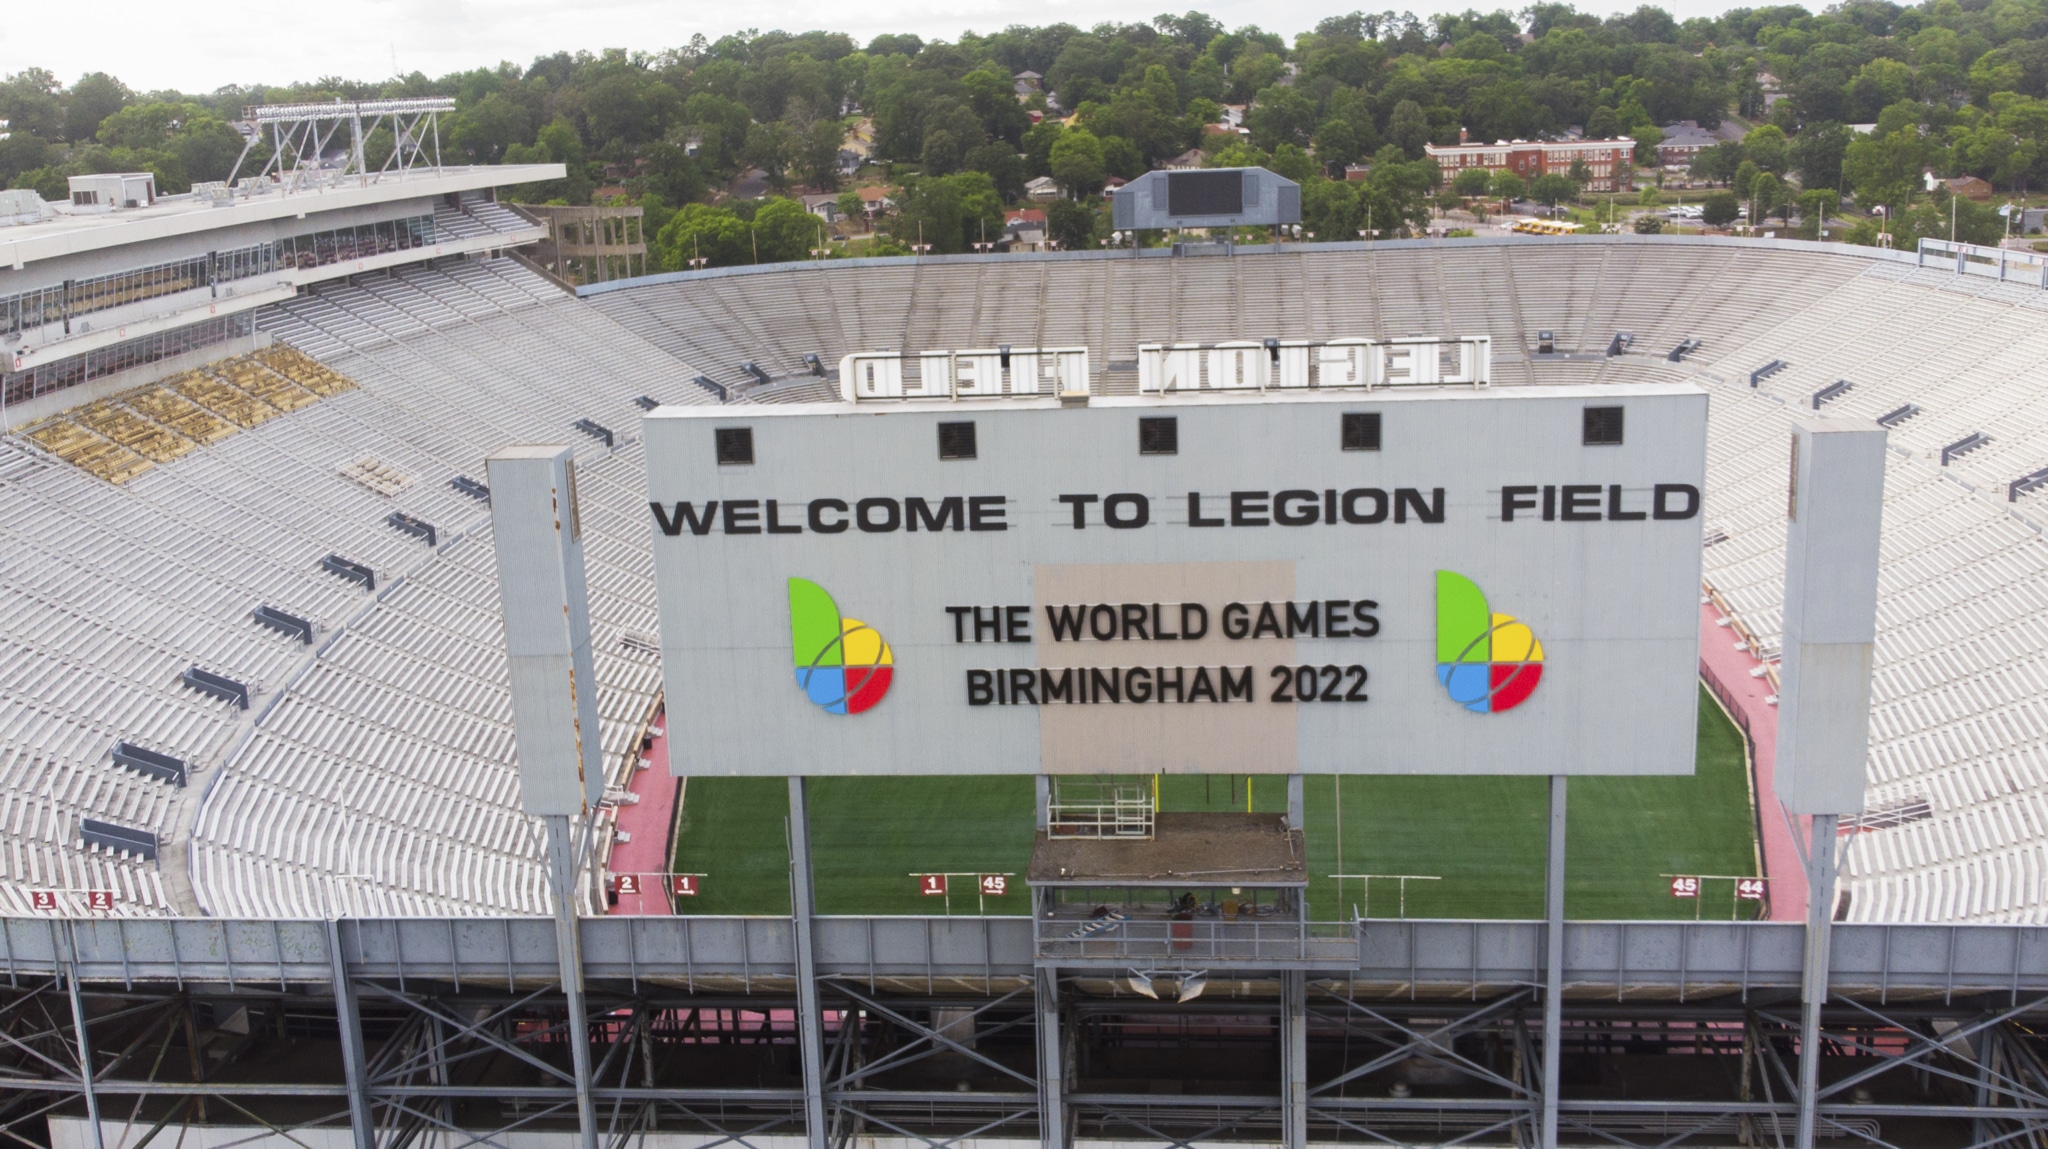 new signs for a big sporting event in Birmingham